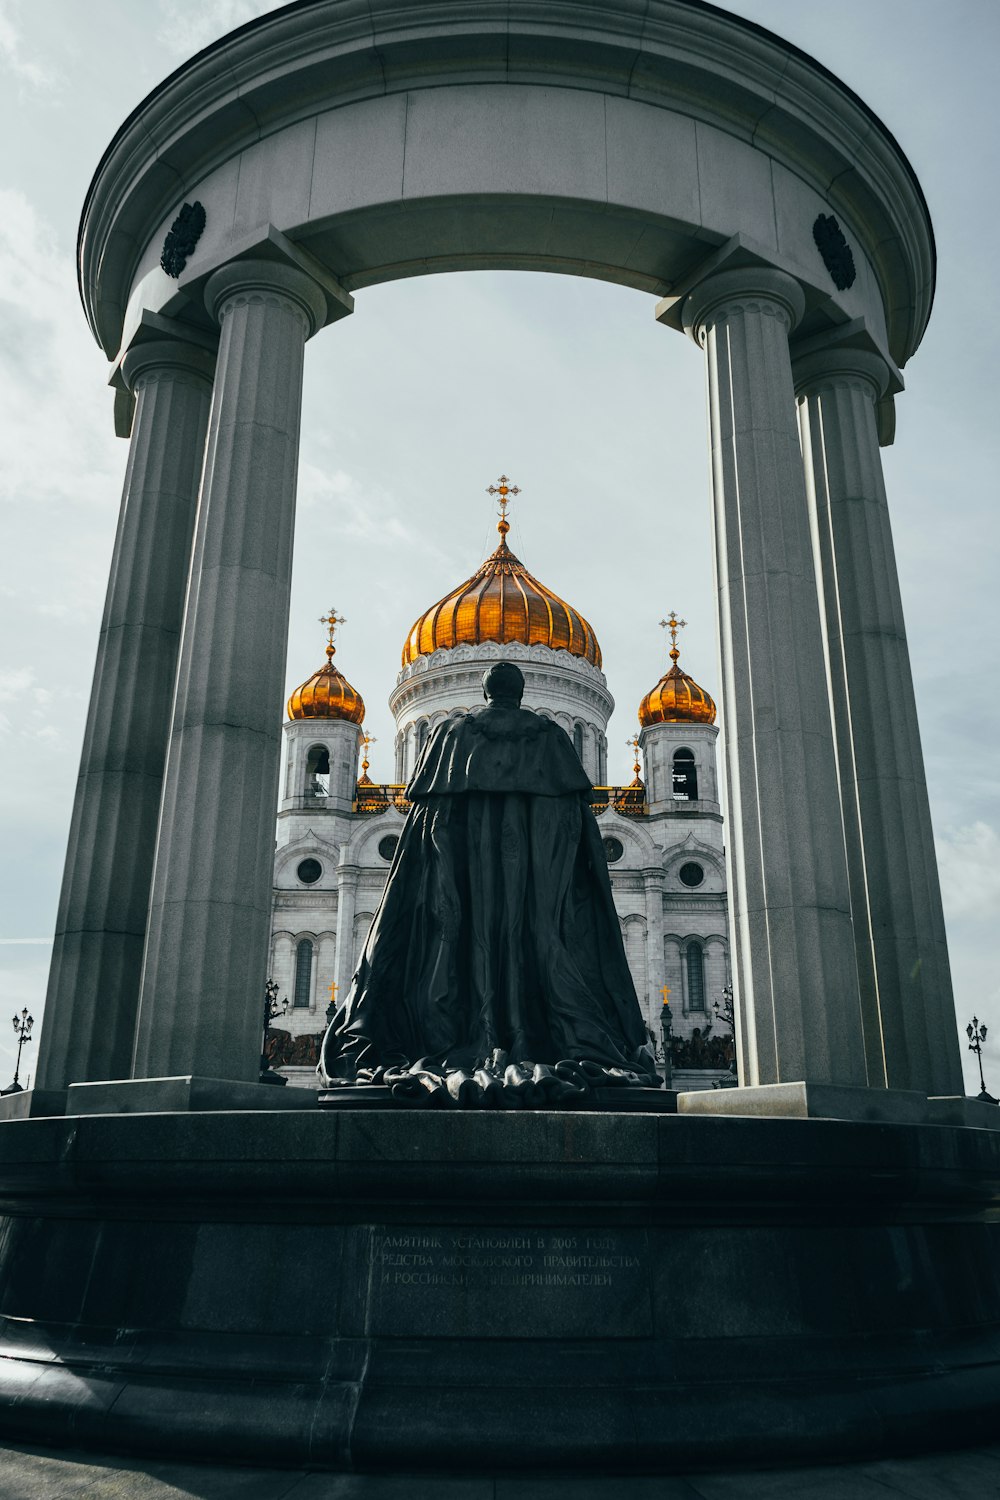 a statue in front of a building with a golden dome